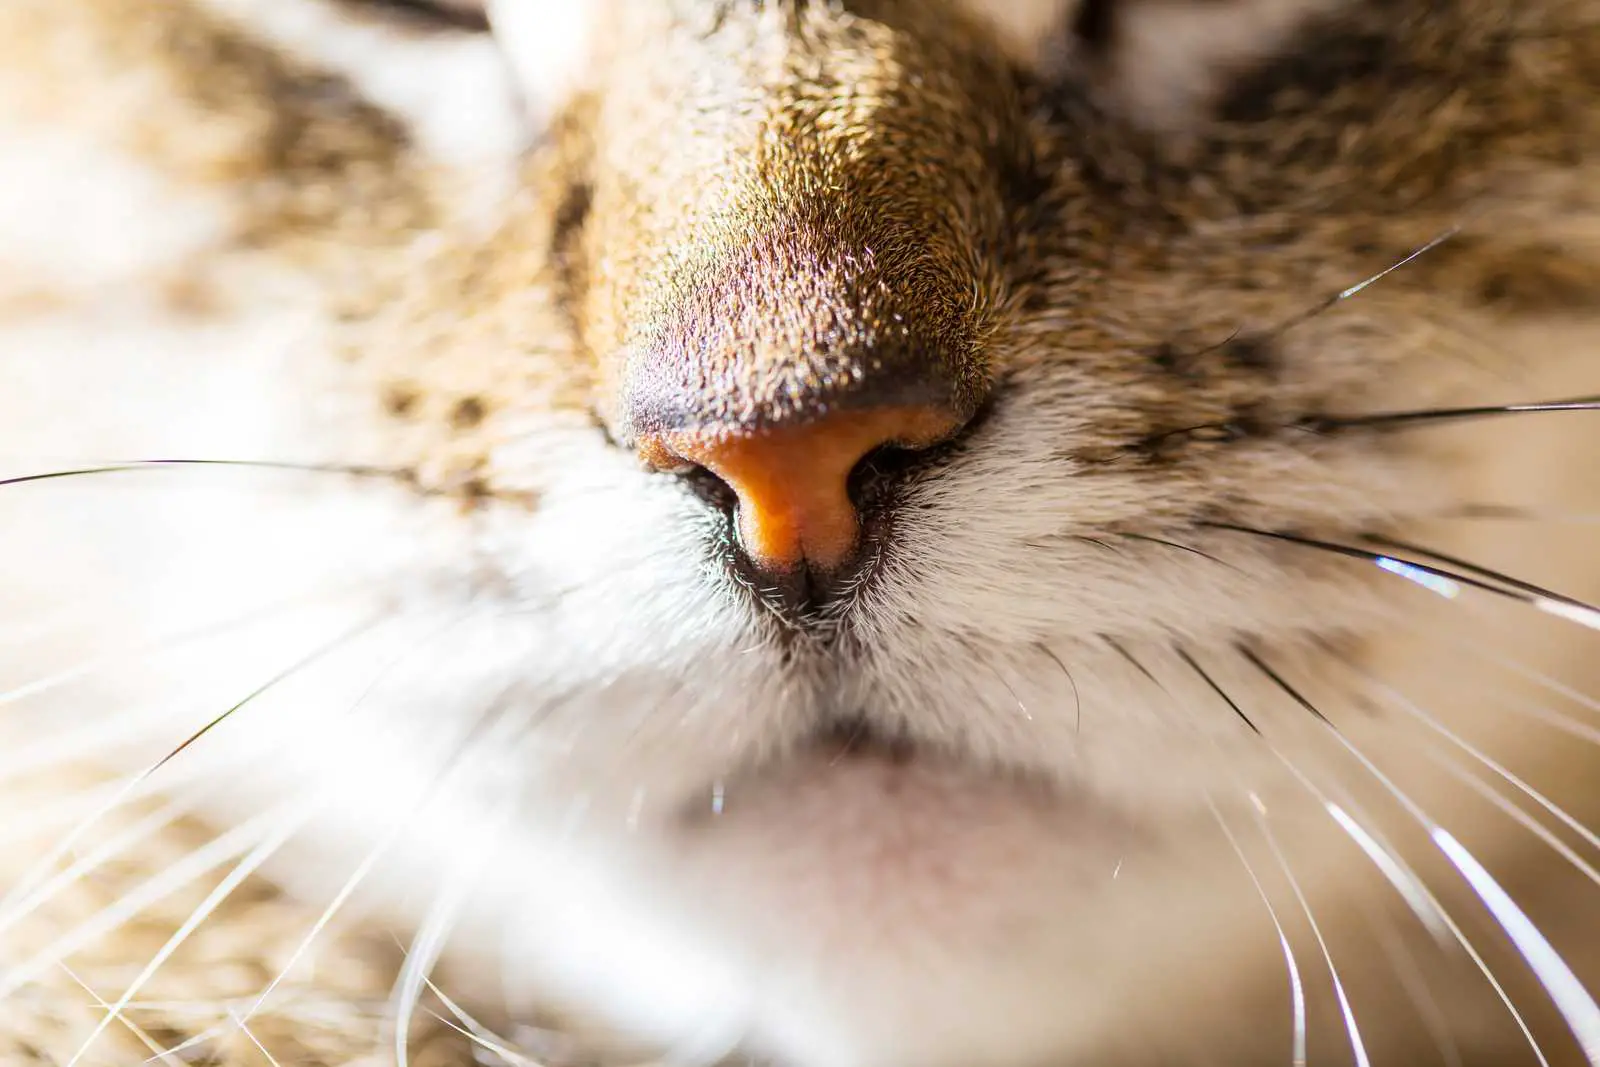 Will my cat's whiskers grow back?